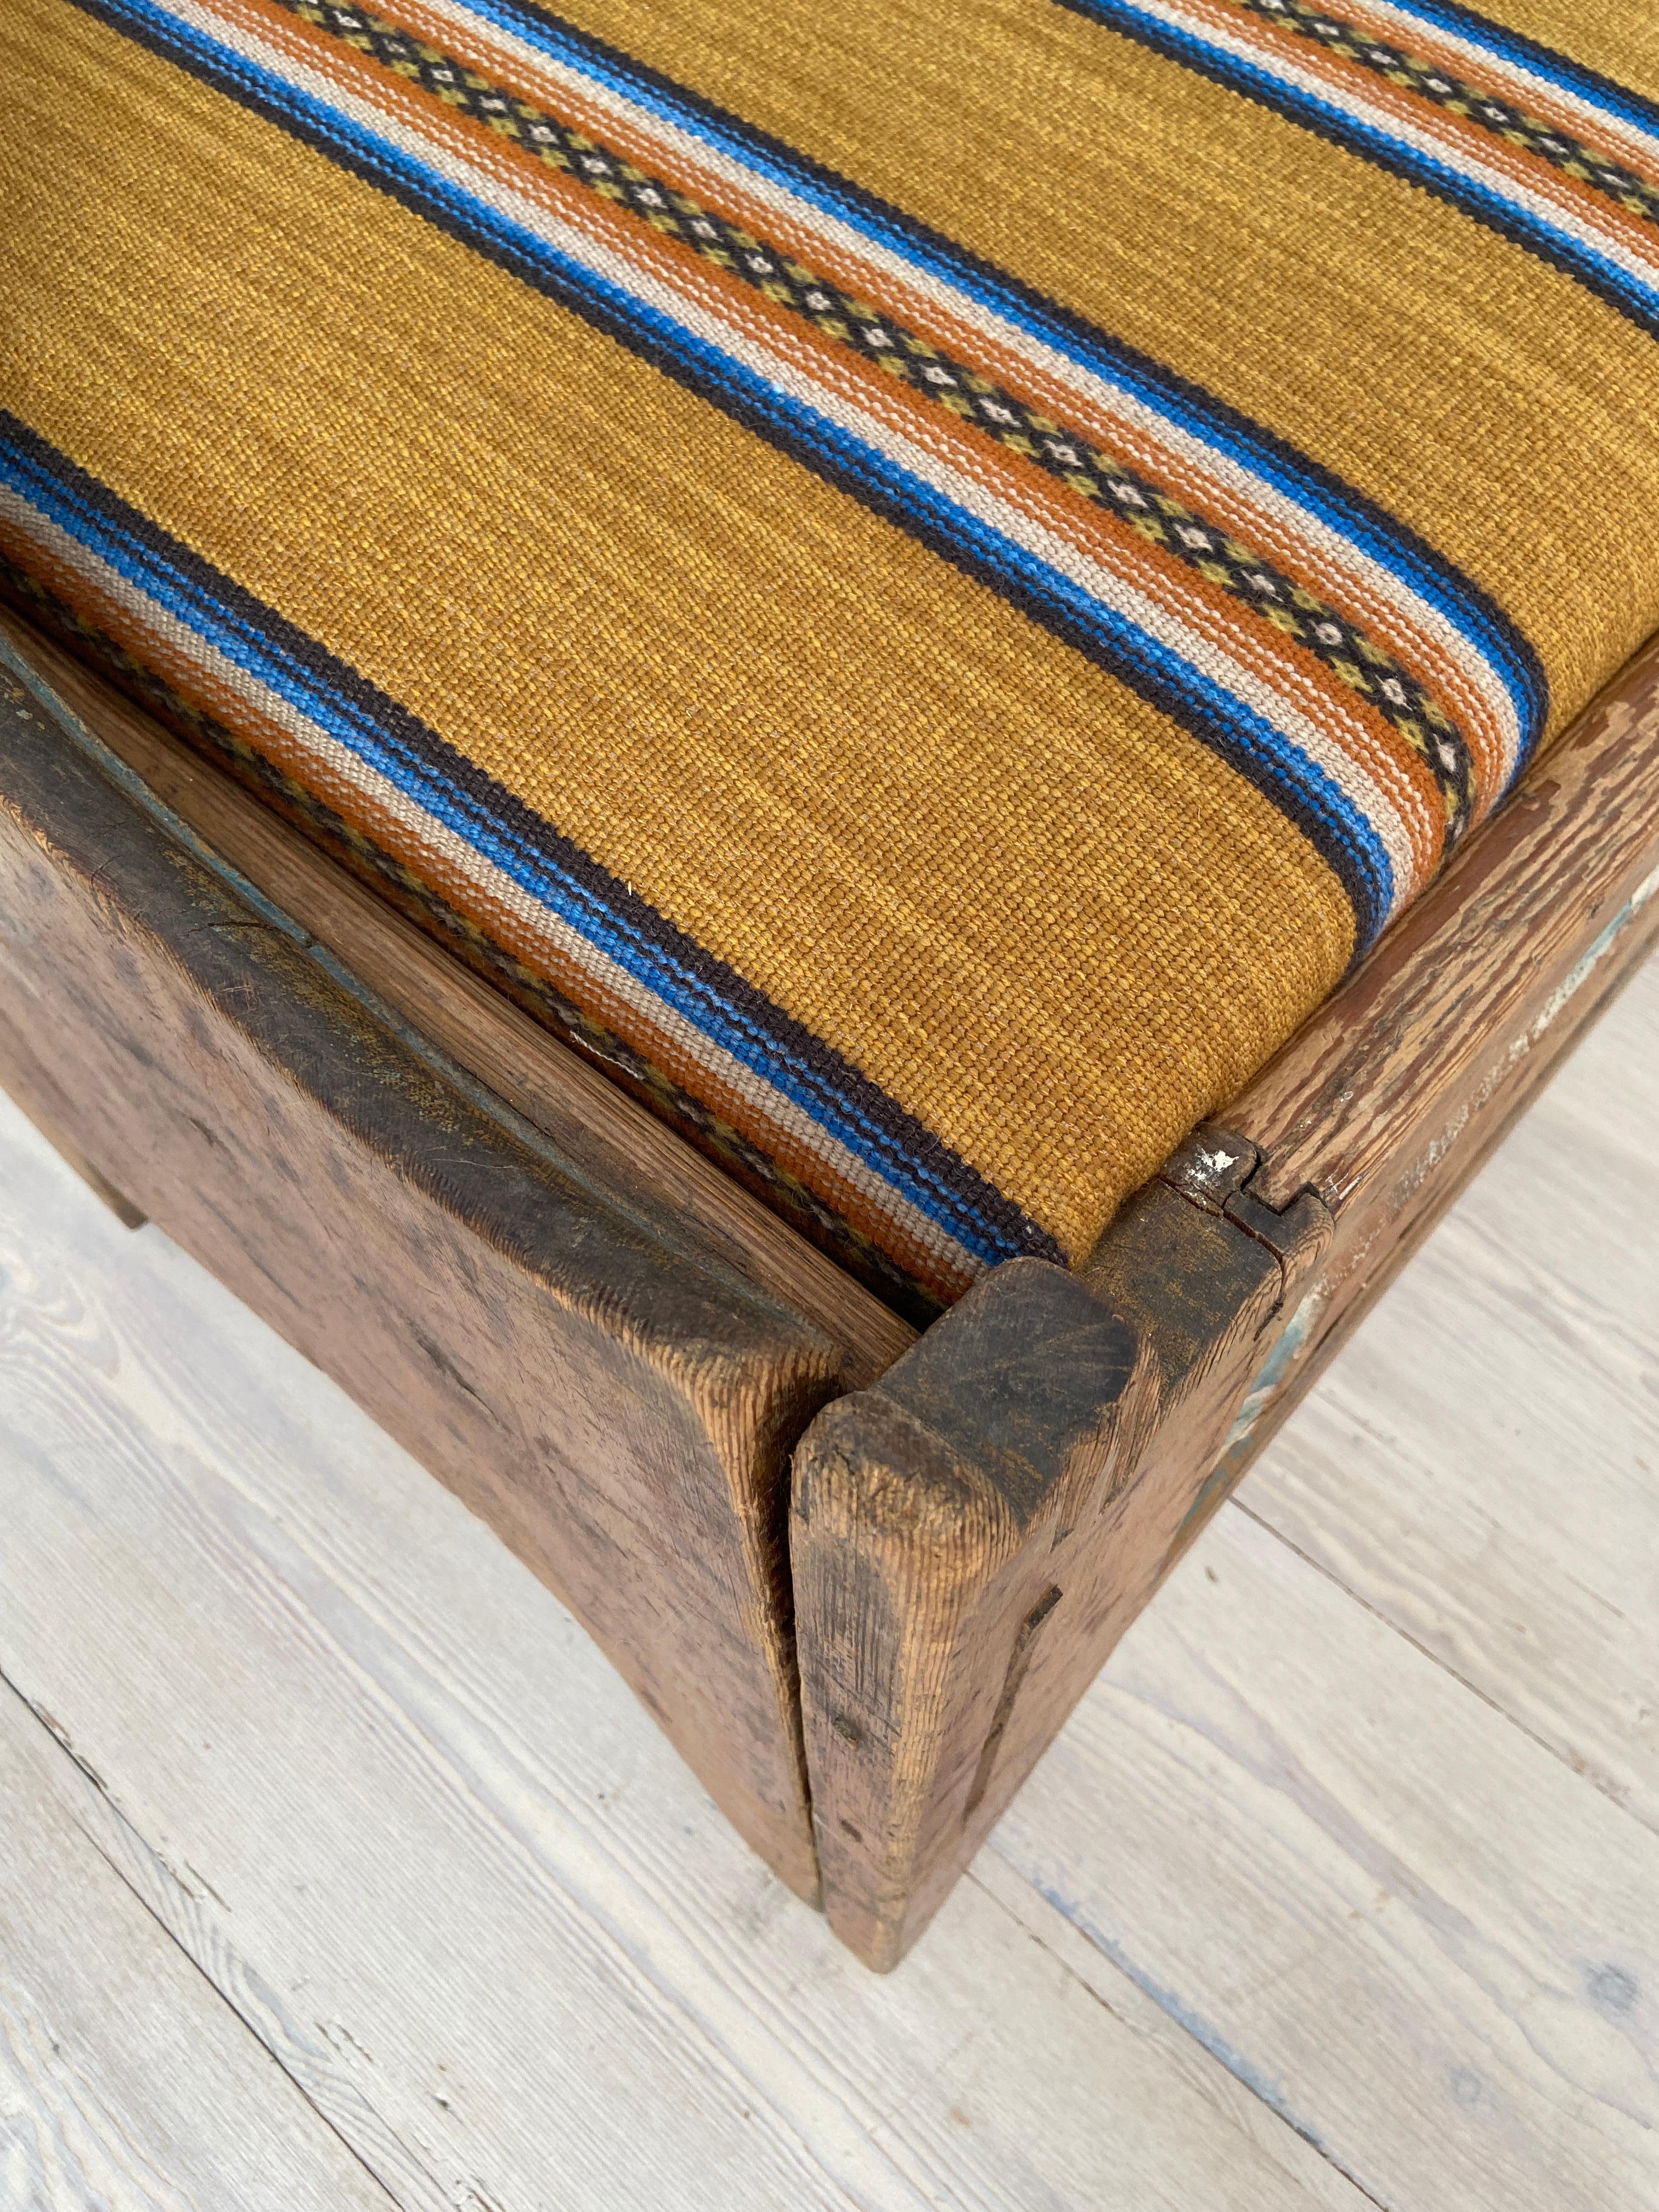 18th Century Antique Folk Art Bench In Pine With Upholstered Seat, Sweden Late 18th-Century